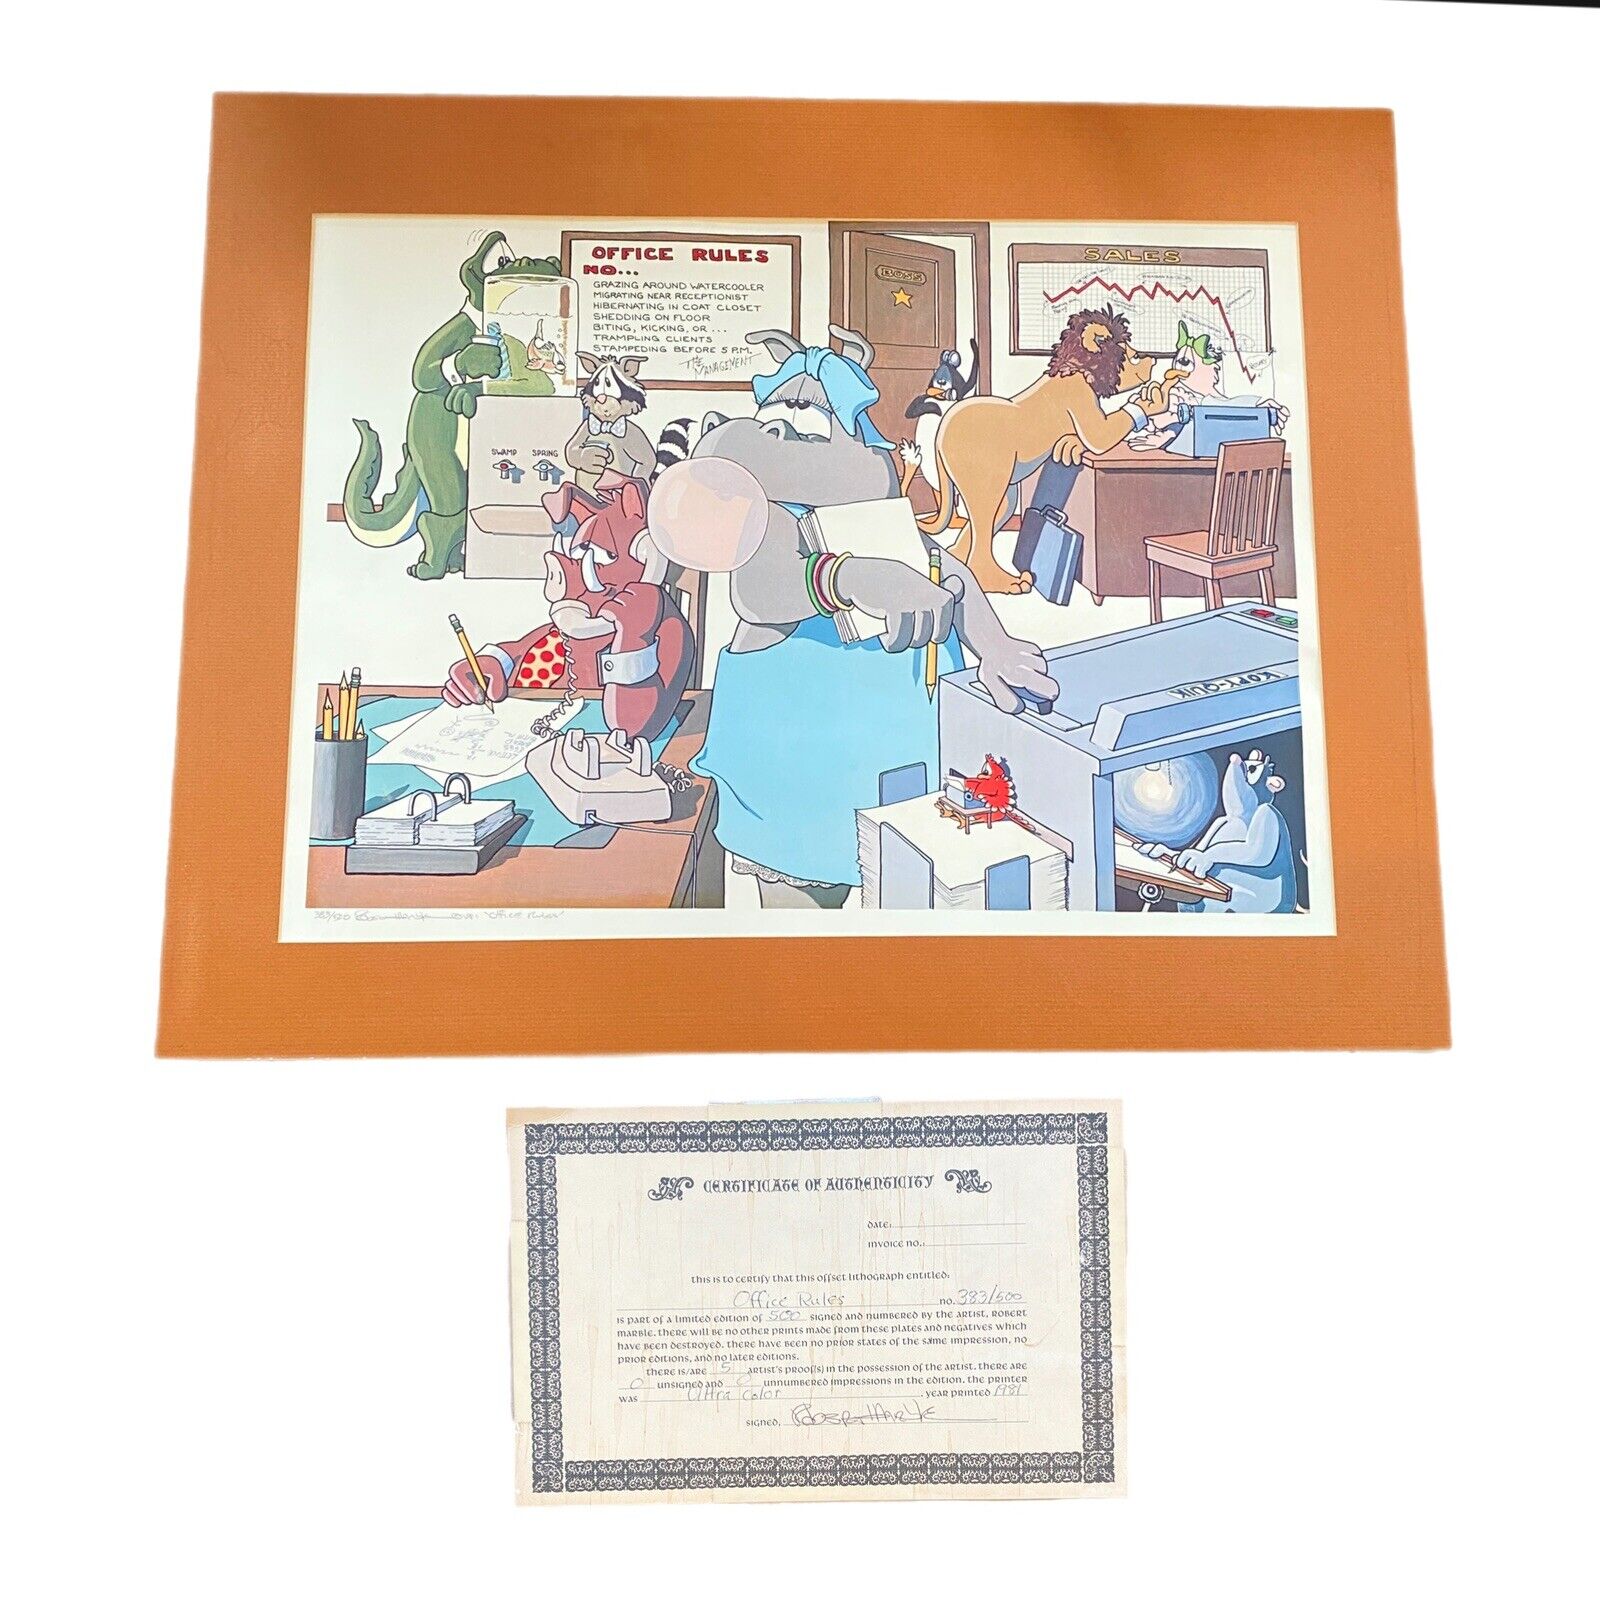 Robert Marble 1981 Signed Numbered Lithograph COA Matted OFFICE RULES 383/500